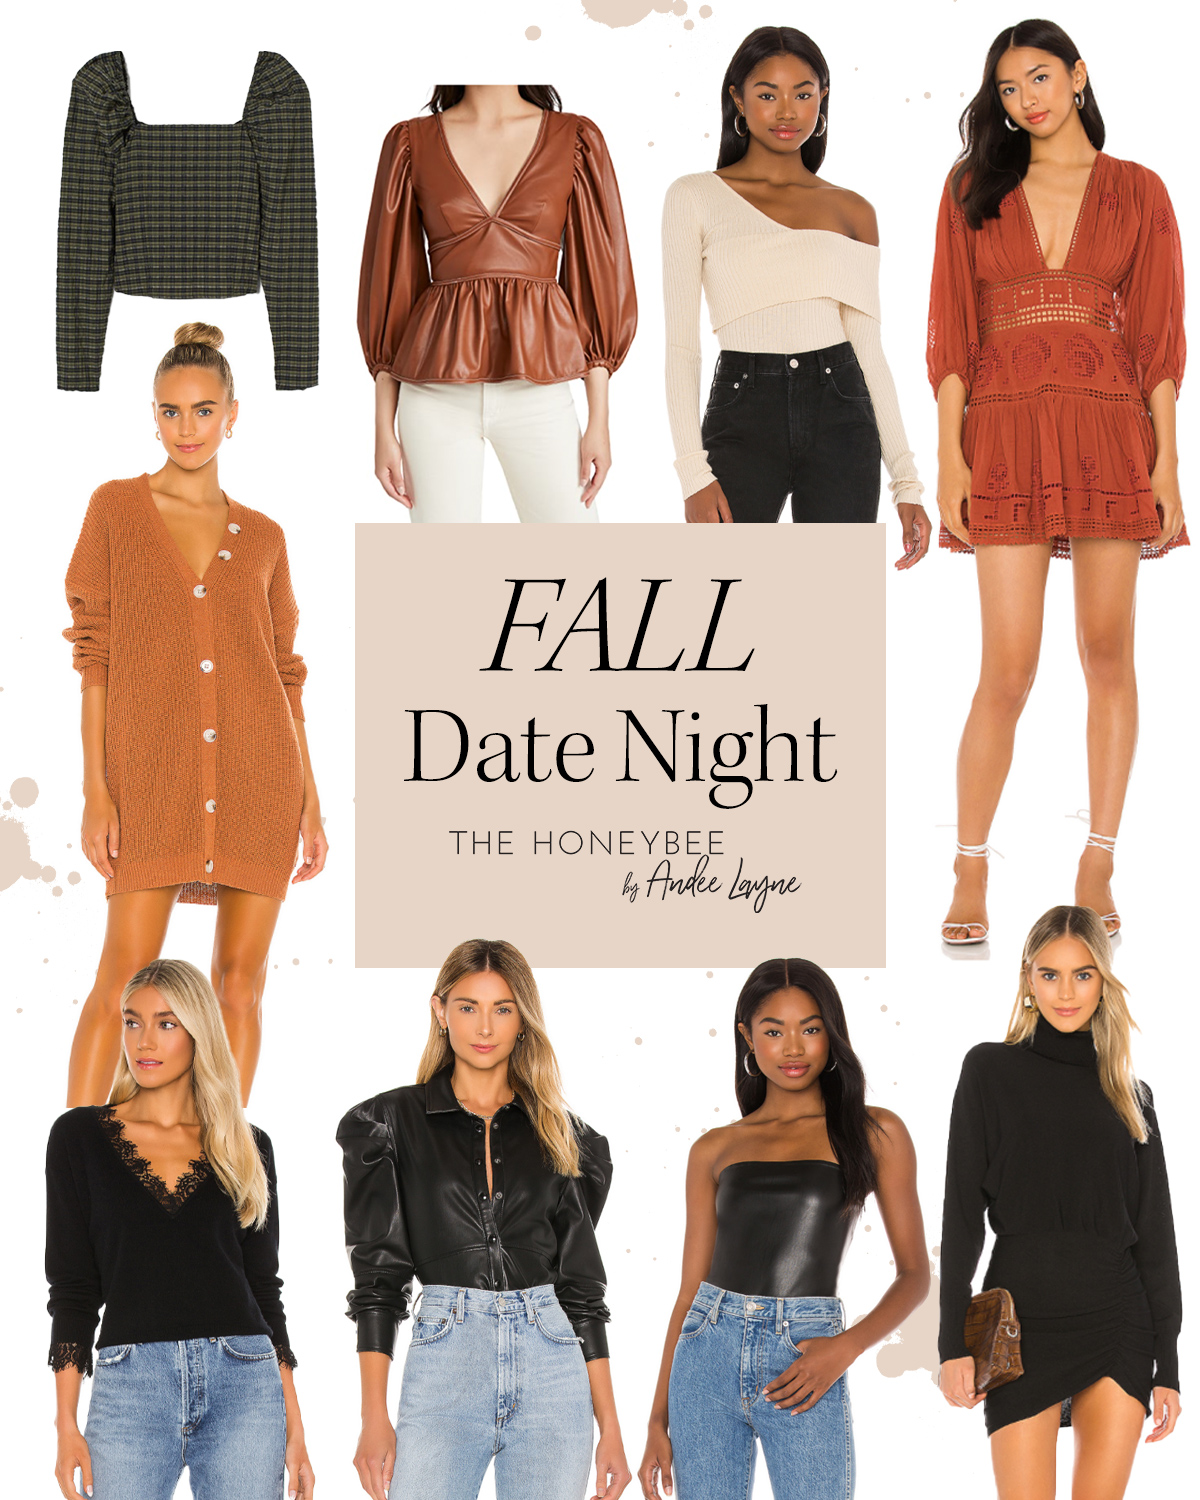 Ten Affordable Date Night Tops - Andee Layne  Night outfits, Date night  outfit, Winter date night outfits